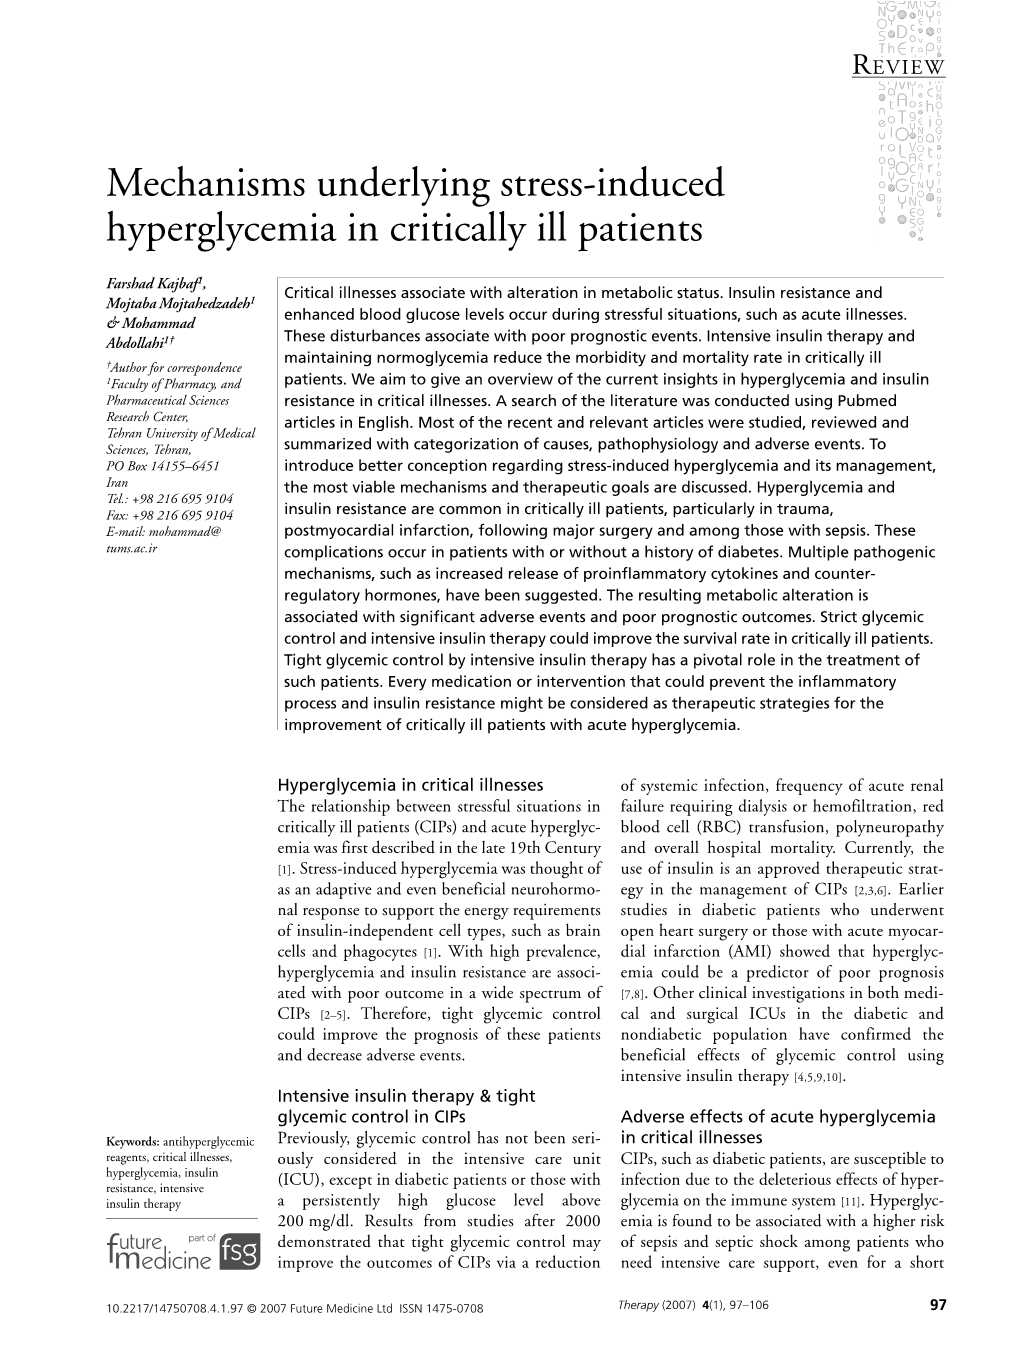 Mechanisms Underlying Stress-Induced Hyperglycemia in Critically Ill Patients